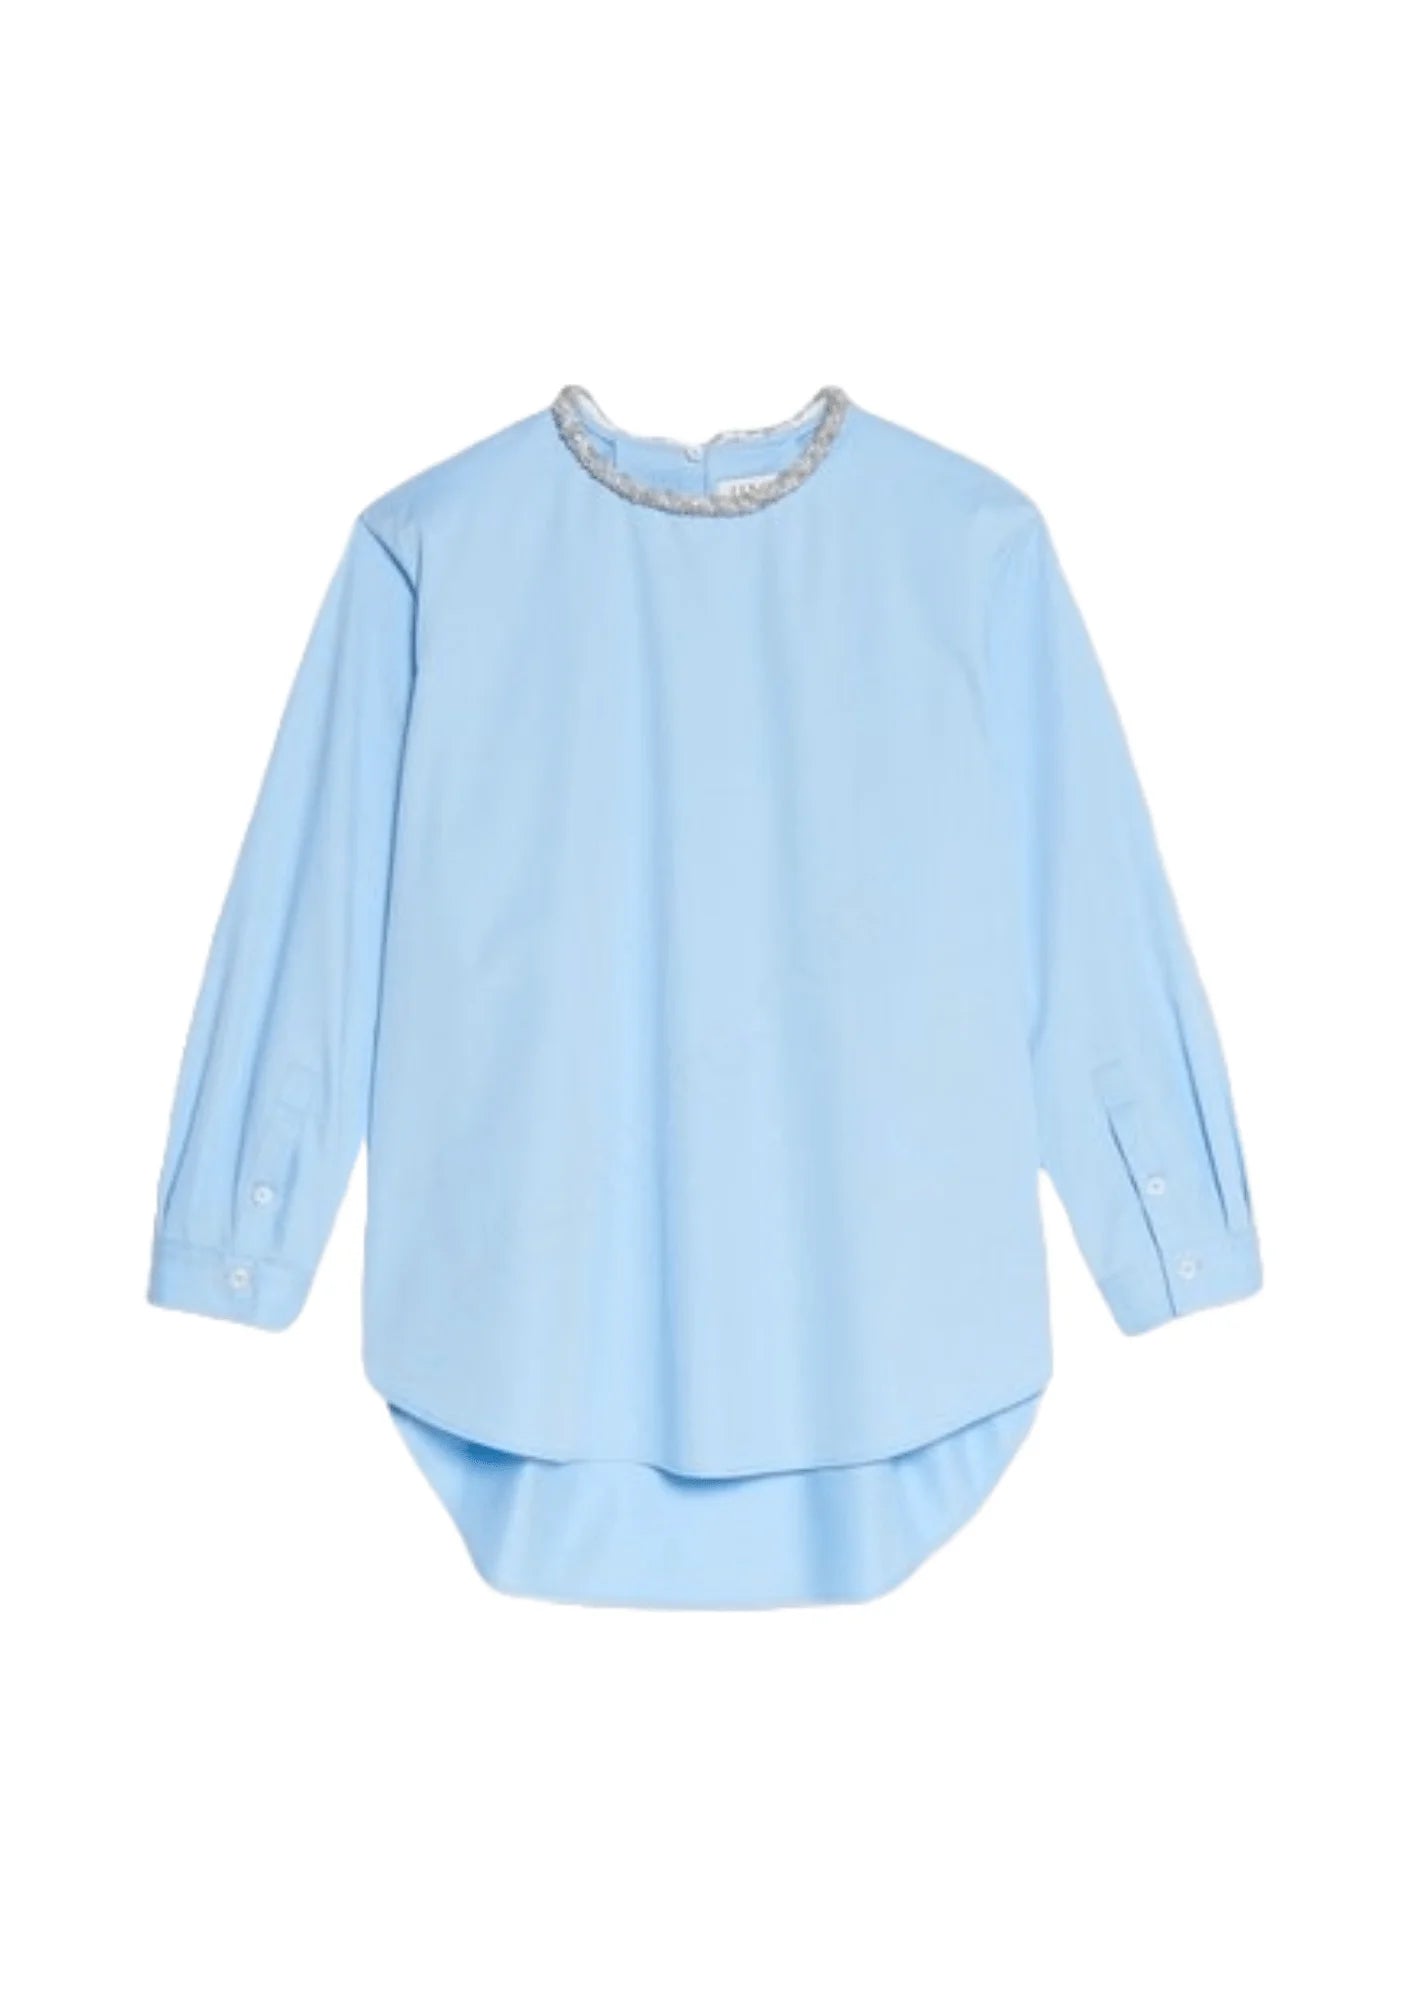 LIGHT BLUE TOP WITH DECORATIVE PEARLS